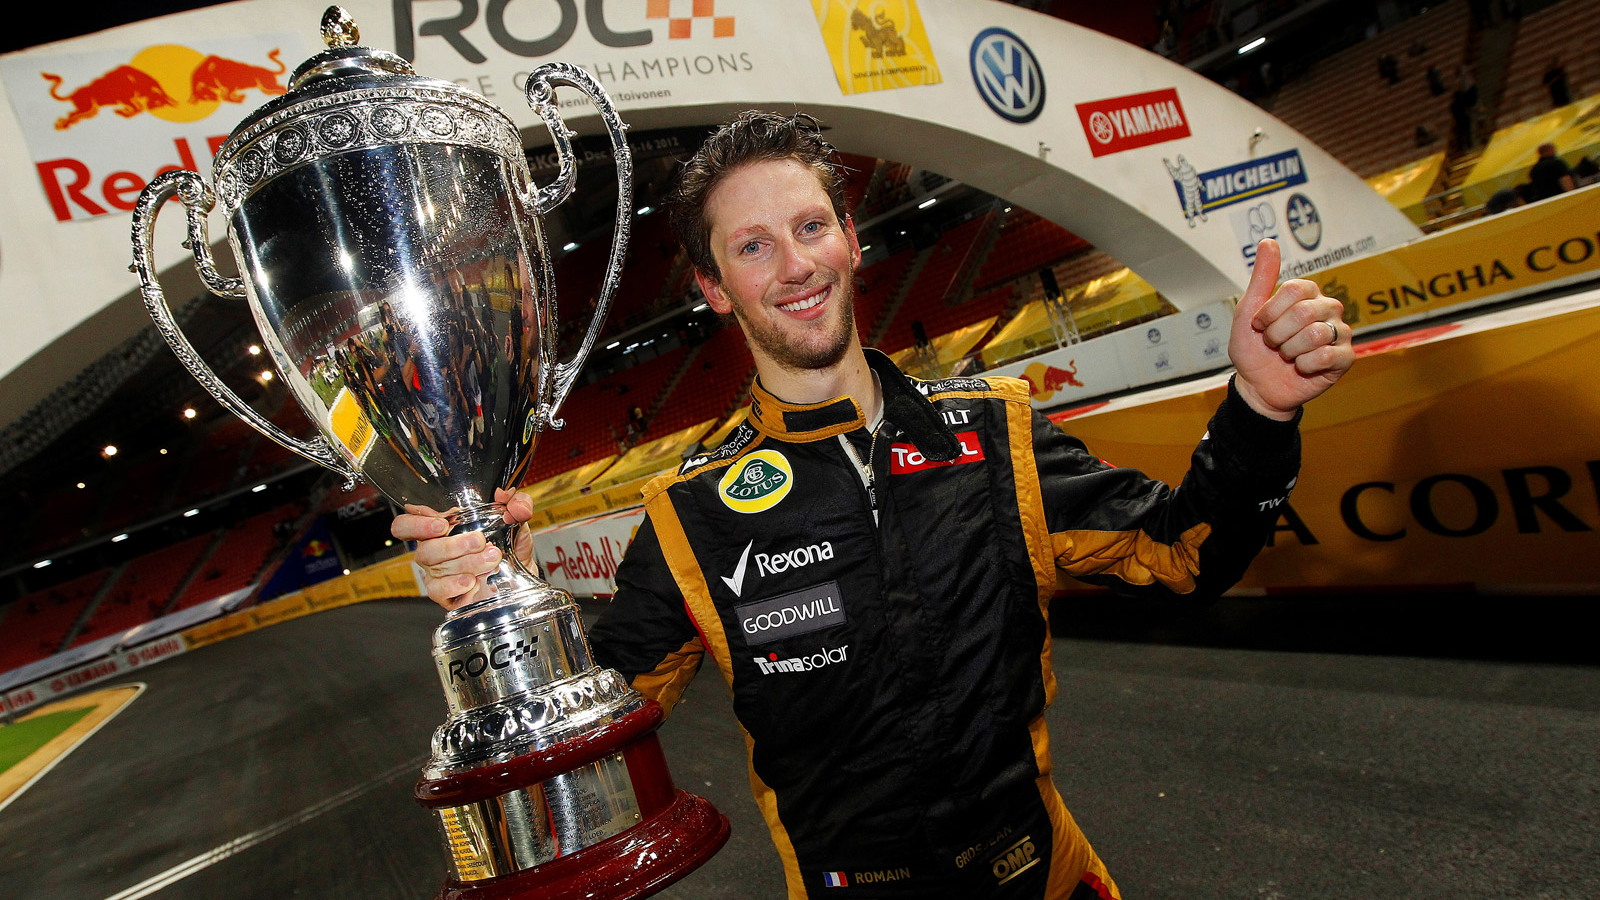 Romain Grosjean after winning the 2012 ROC - Image courtesy of Race Of Champions